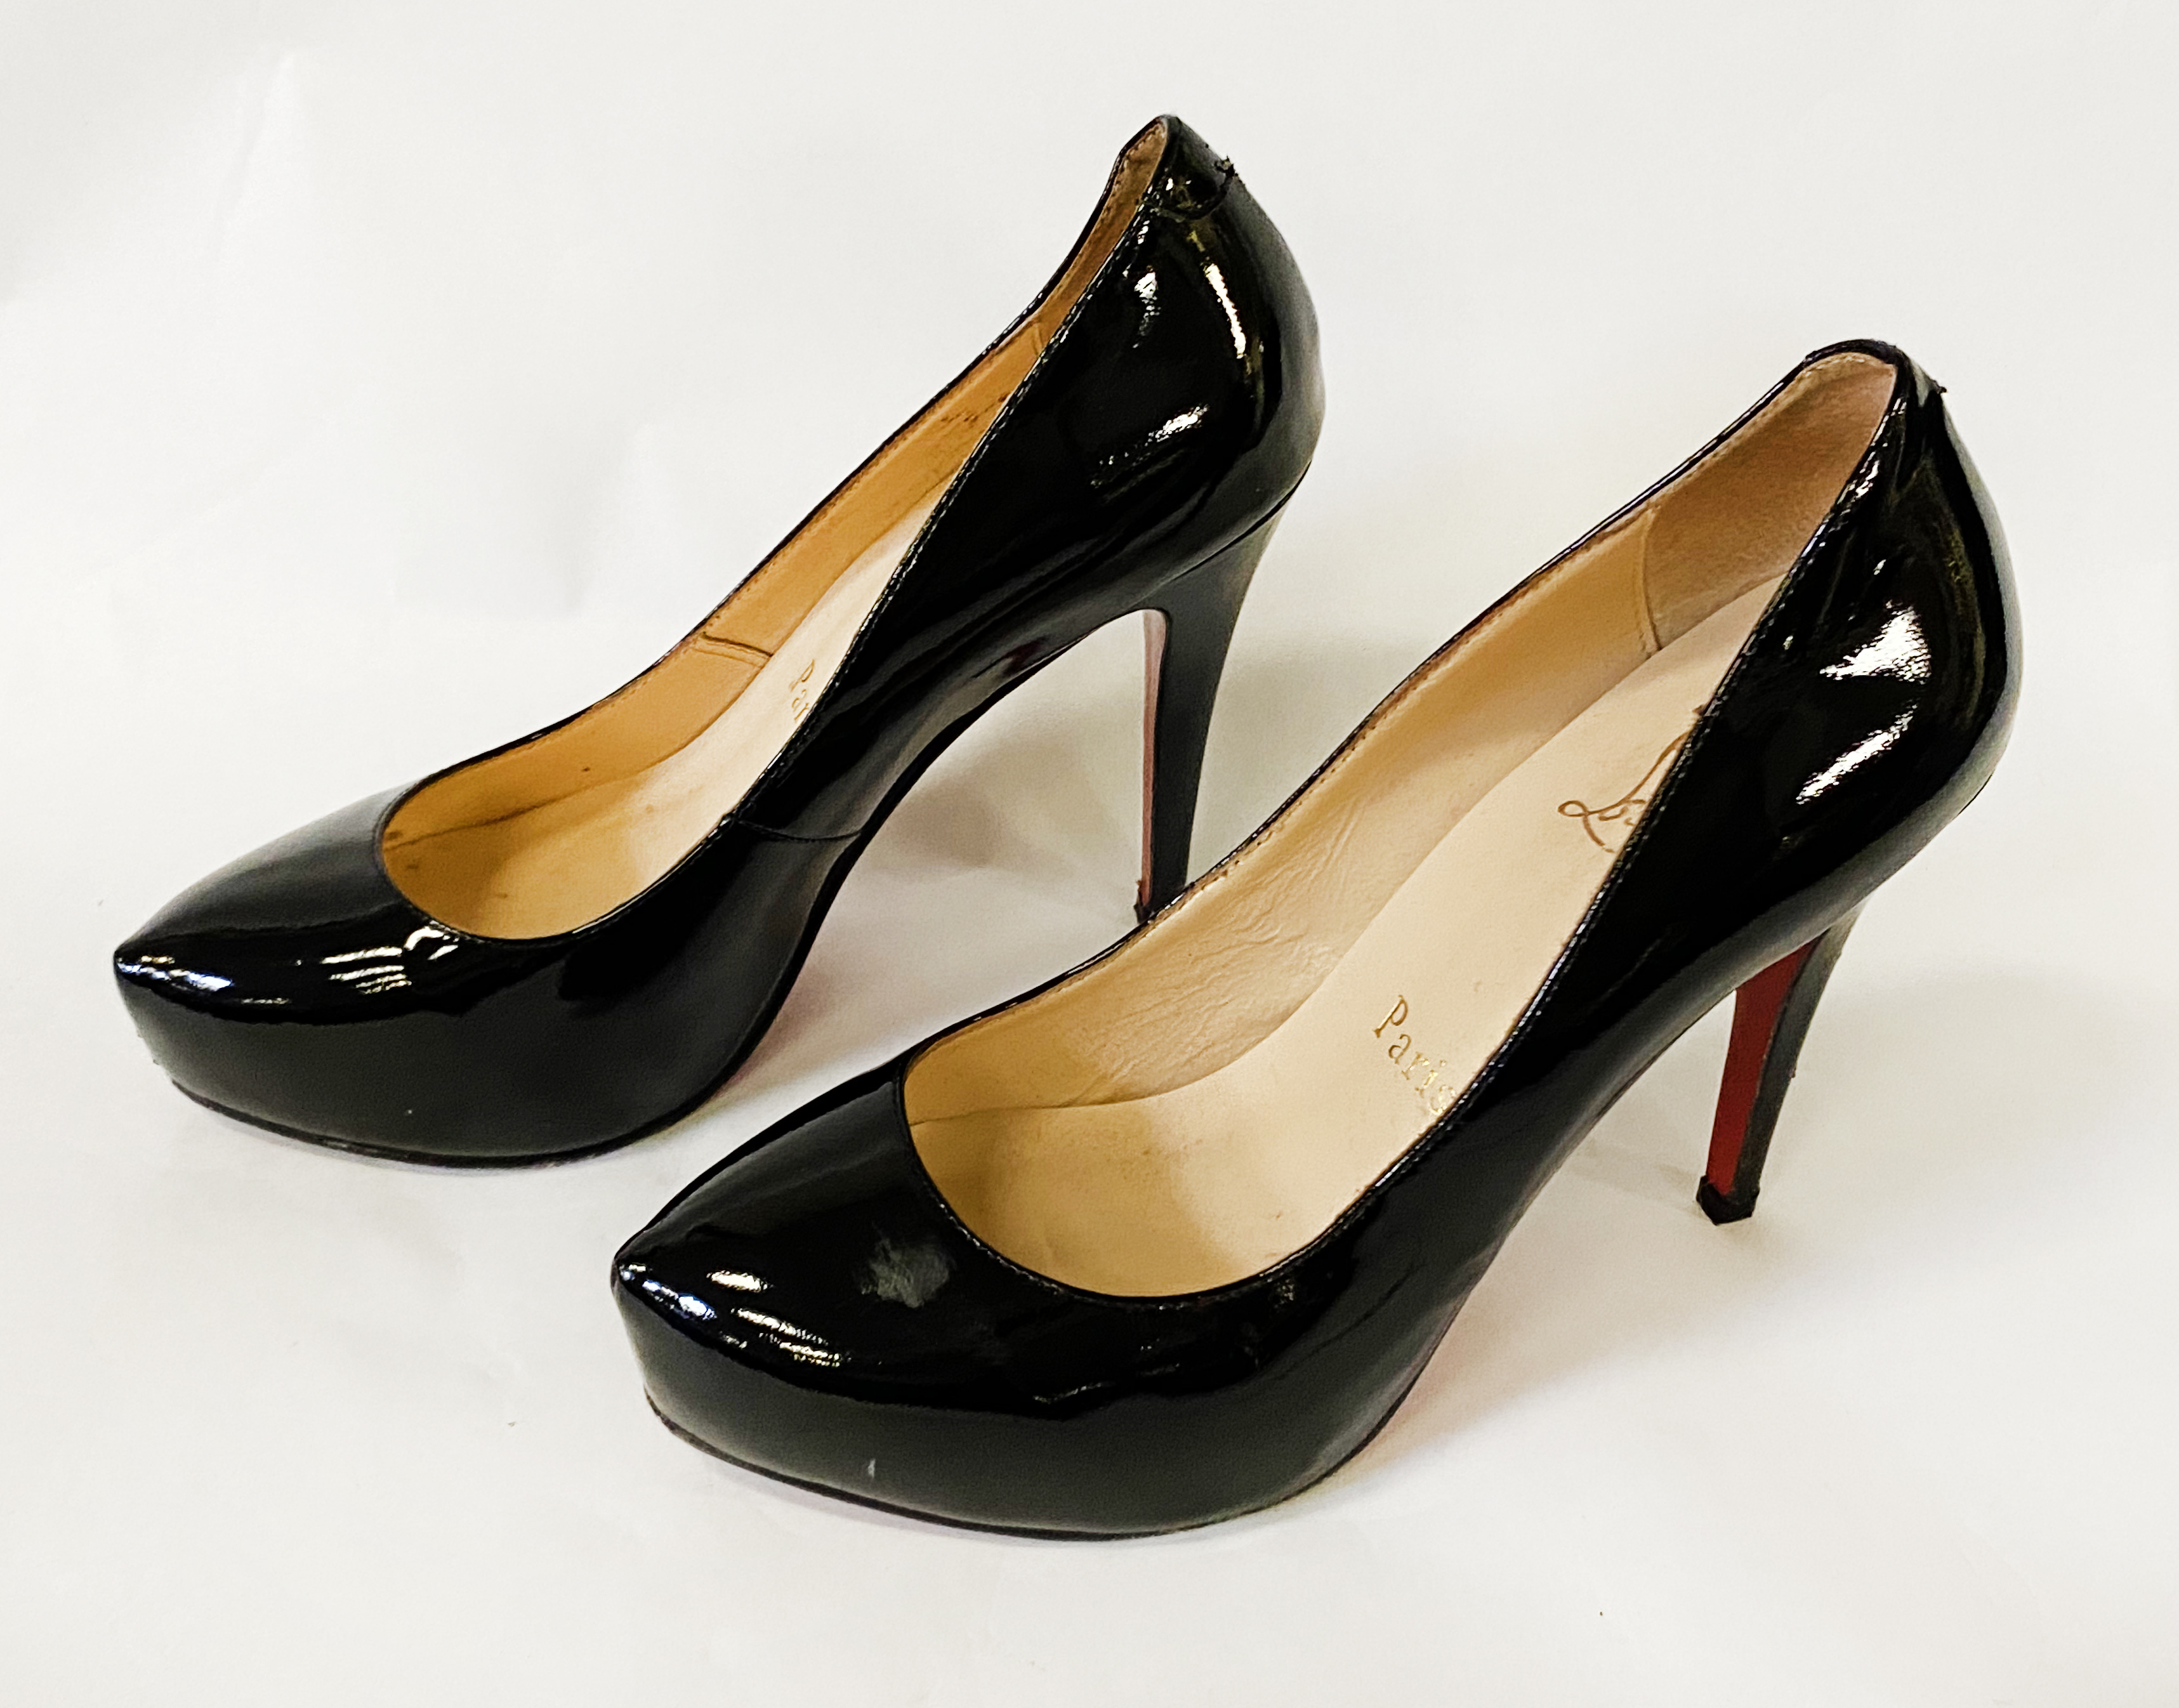 PAIR OF CHRISTIAN LOUBOUTIN BLACK HIGH HEELS SHOES SIZE 40 A/F